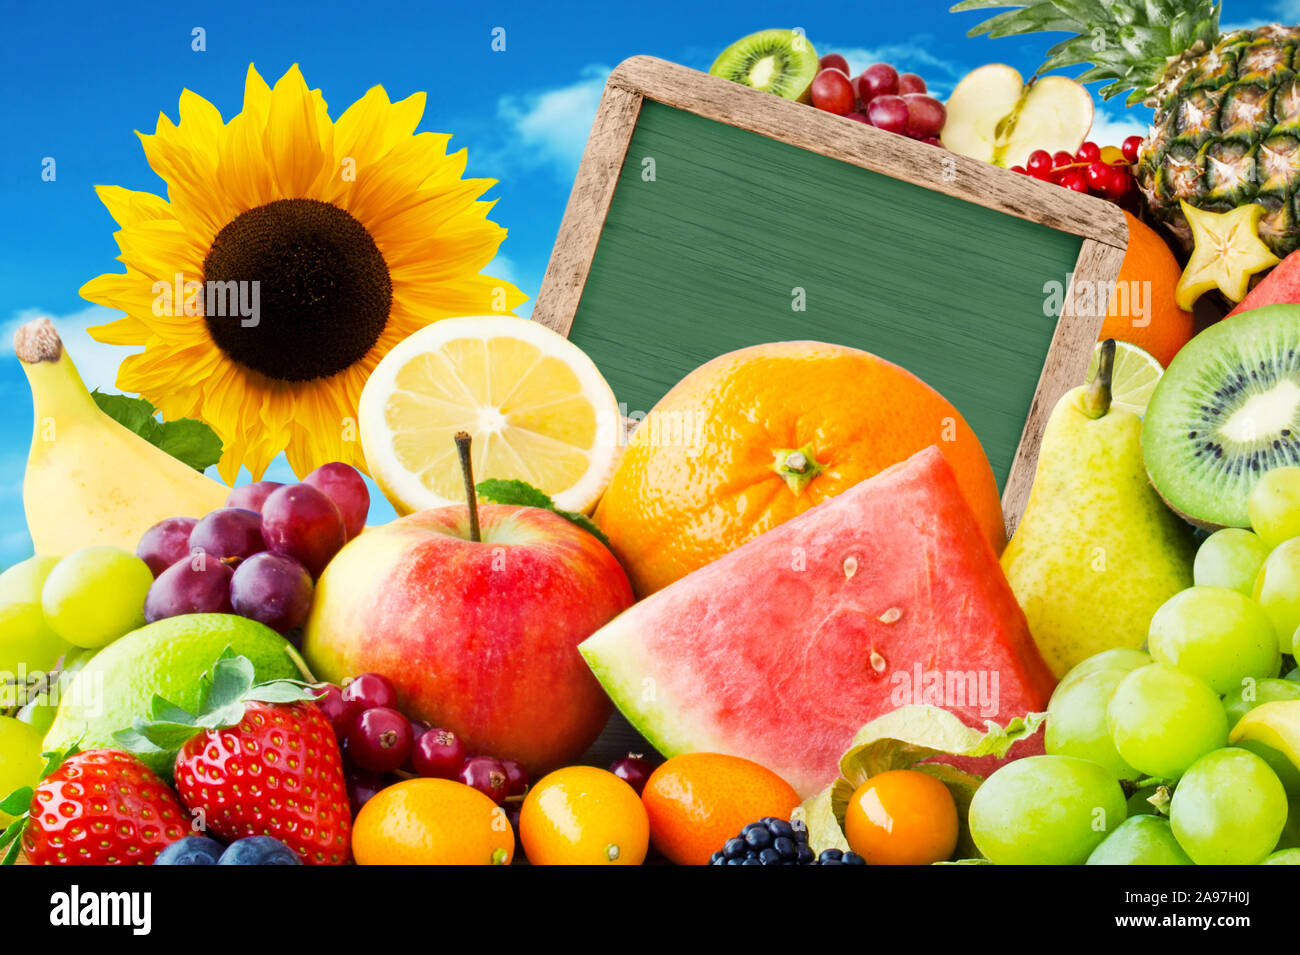 Fruits and sunflower with label Stock Photo